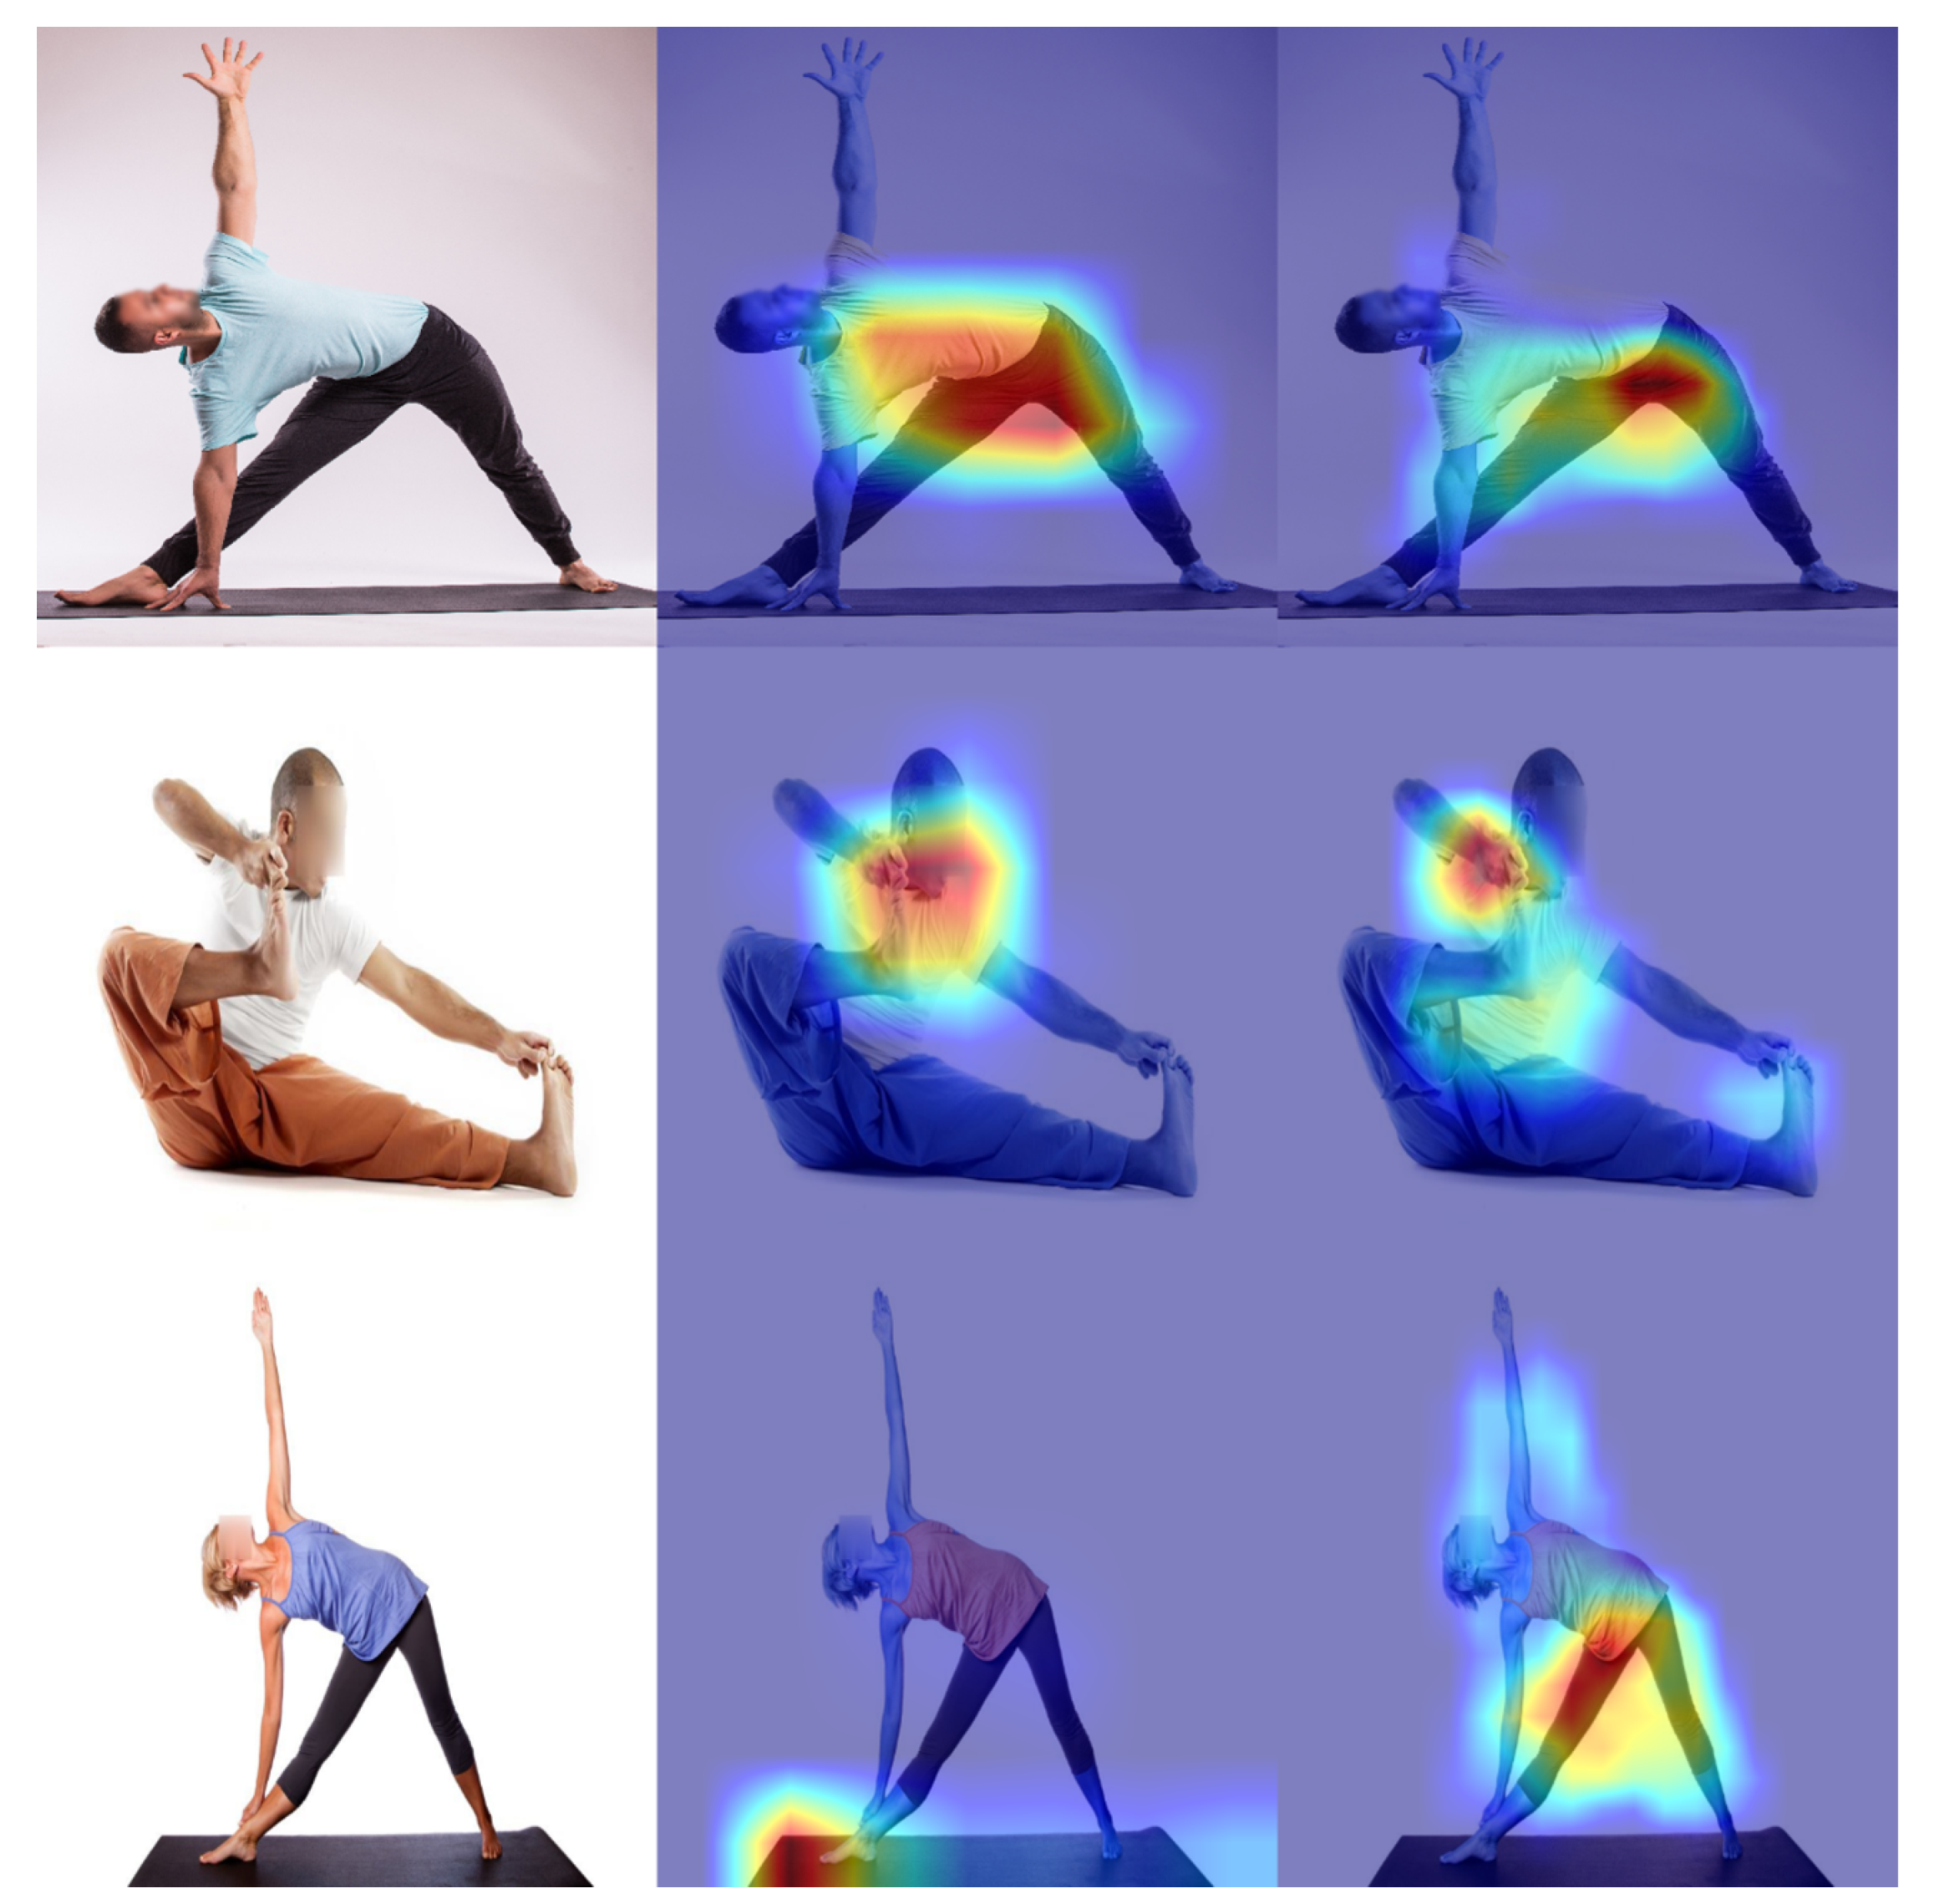 Computer Vision Based AI for Human Pose Detection | Devpost